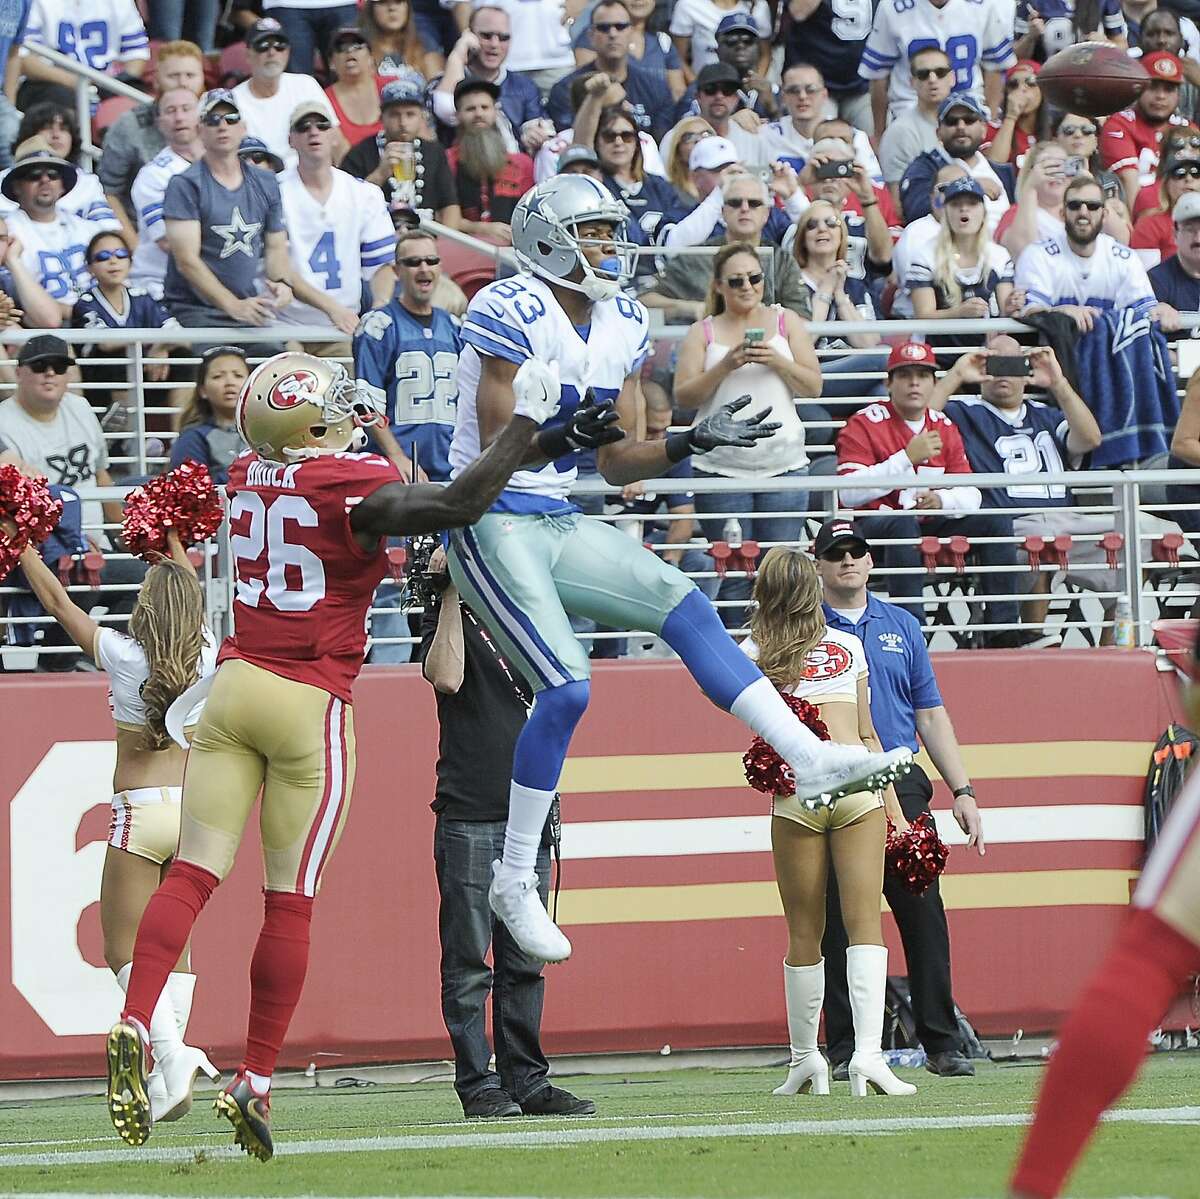 Dallas Cowboys wide receiver Terrance Williams (83) catches a touchdown pass in front of San Francisco 49ers cornerback Tramaine Brock (26) during the second quarter on Sunday, Oct. 2, 2016 at Levi's Stadium in Santa Clara, Calif. (Max Faulkner/Fort Worth Star-Telegram/TNS)